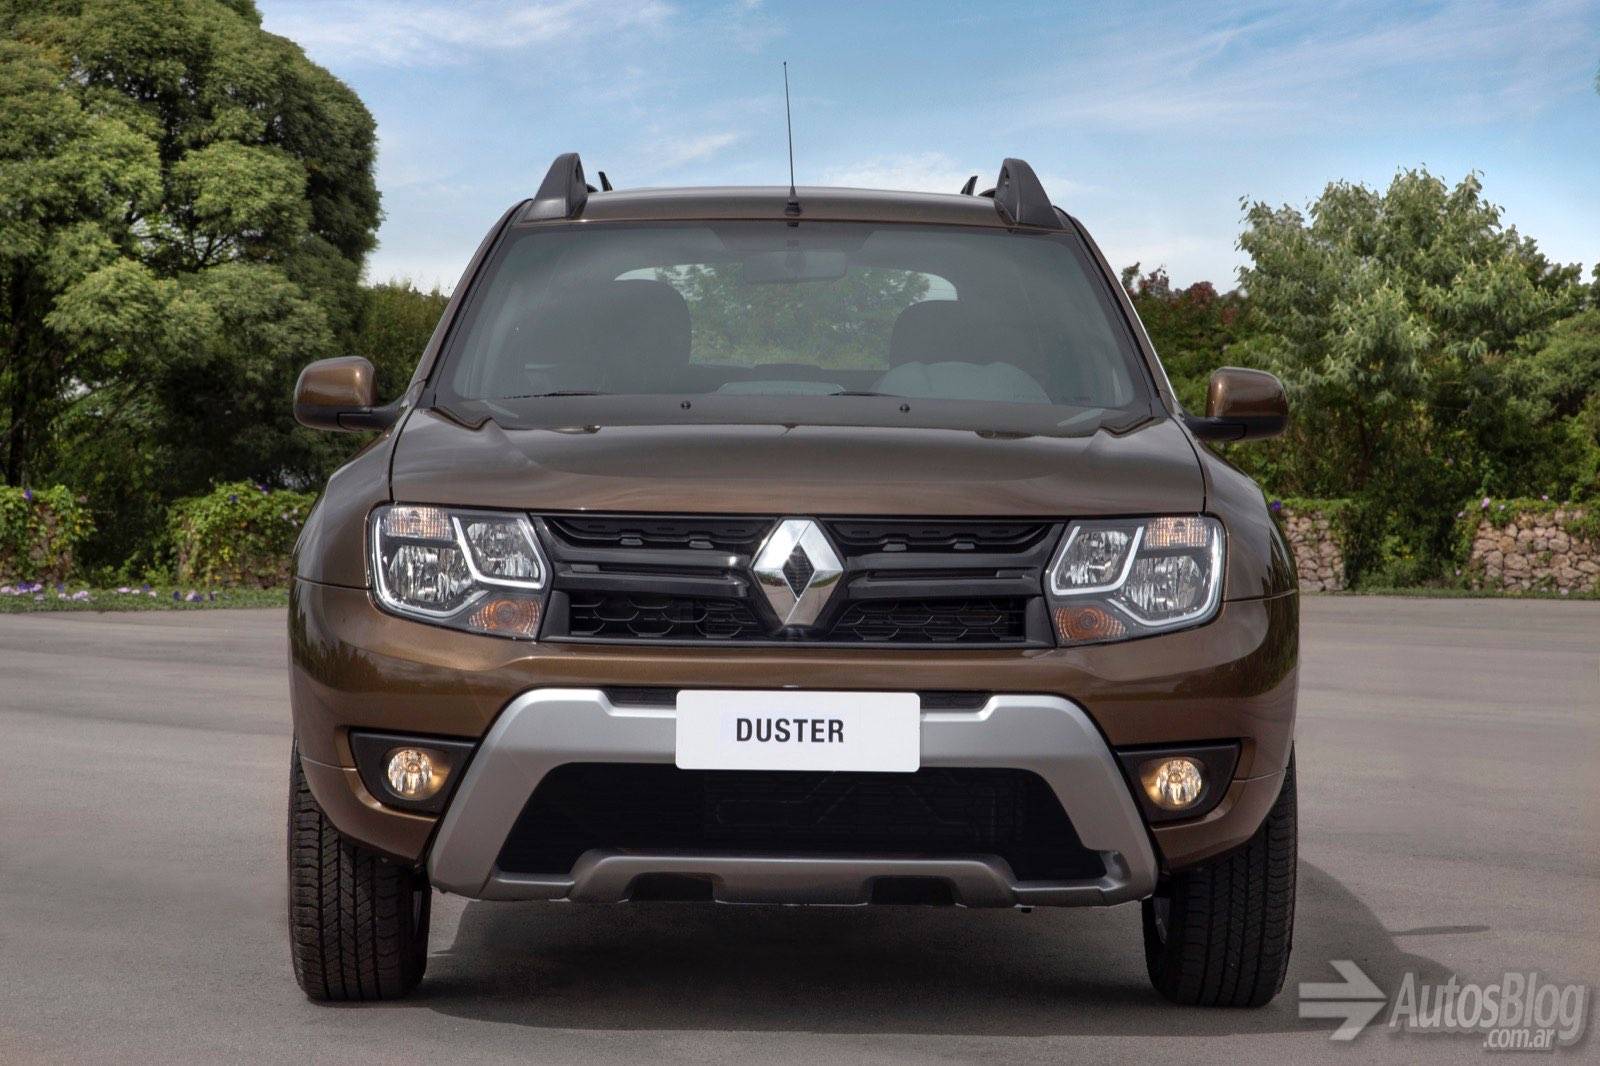 Рено дастер 2015 2.0. Renault Duster 2015. Рено Дастер 2016. Рено Дастер 2015 года. Renault Duster 2017.